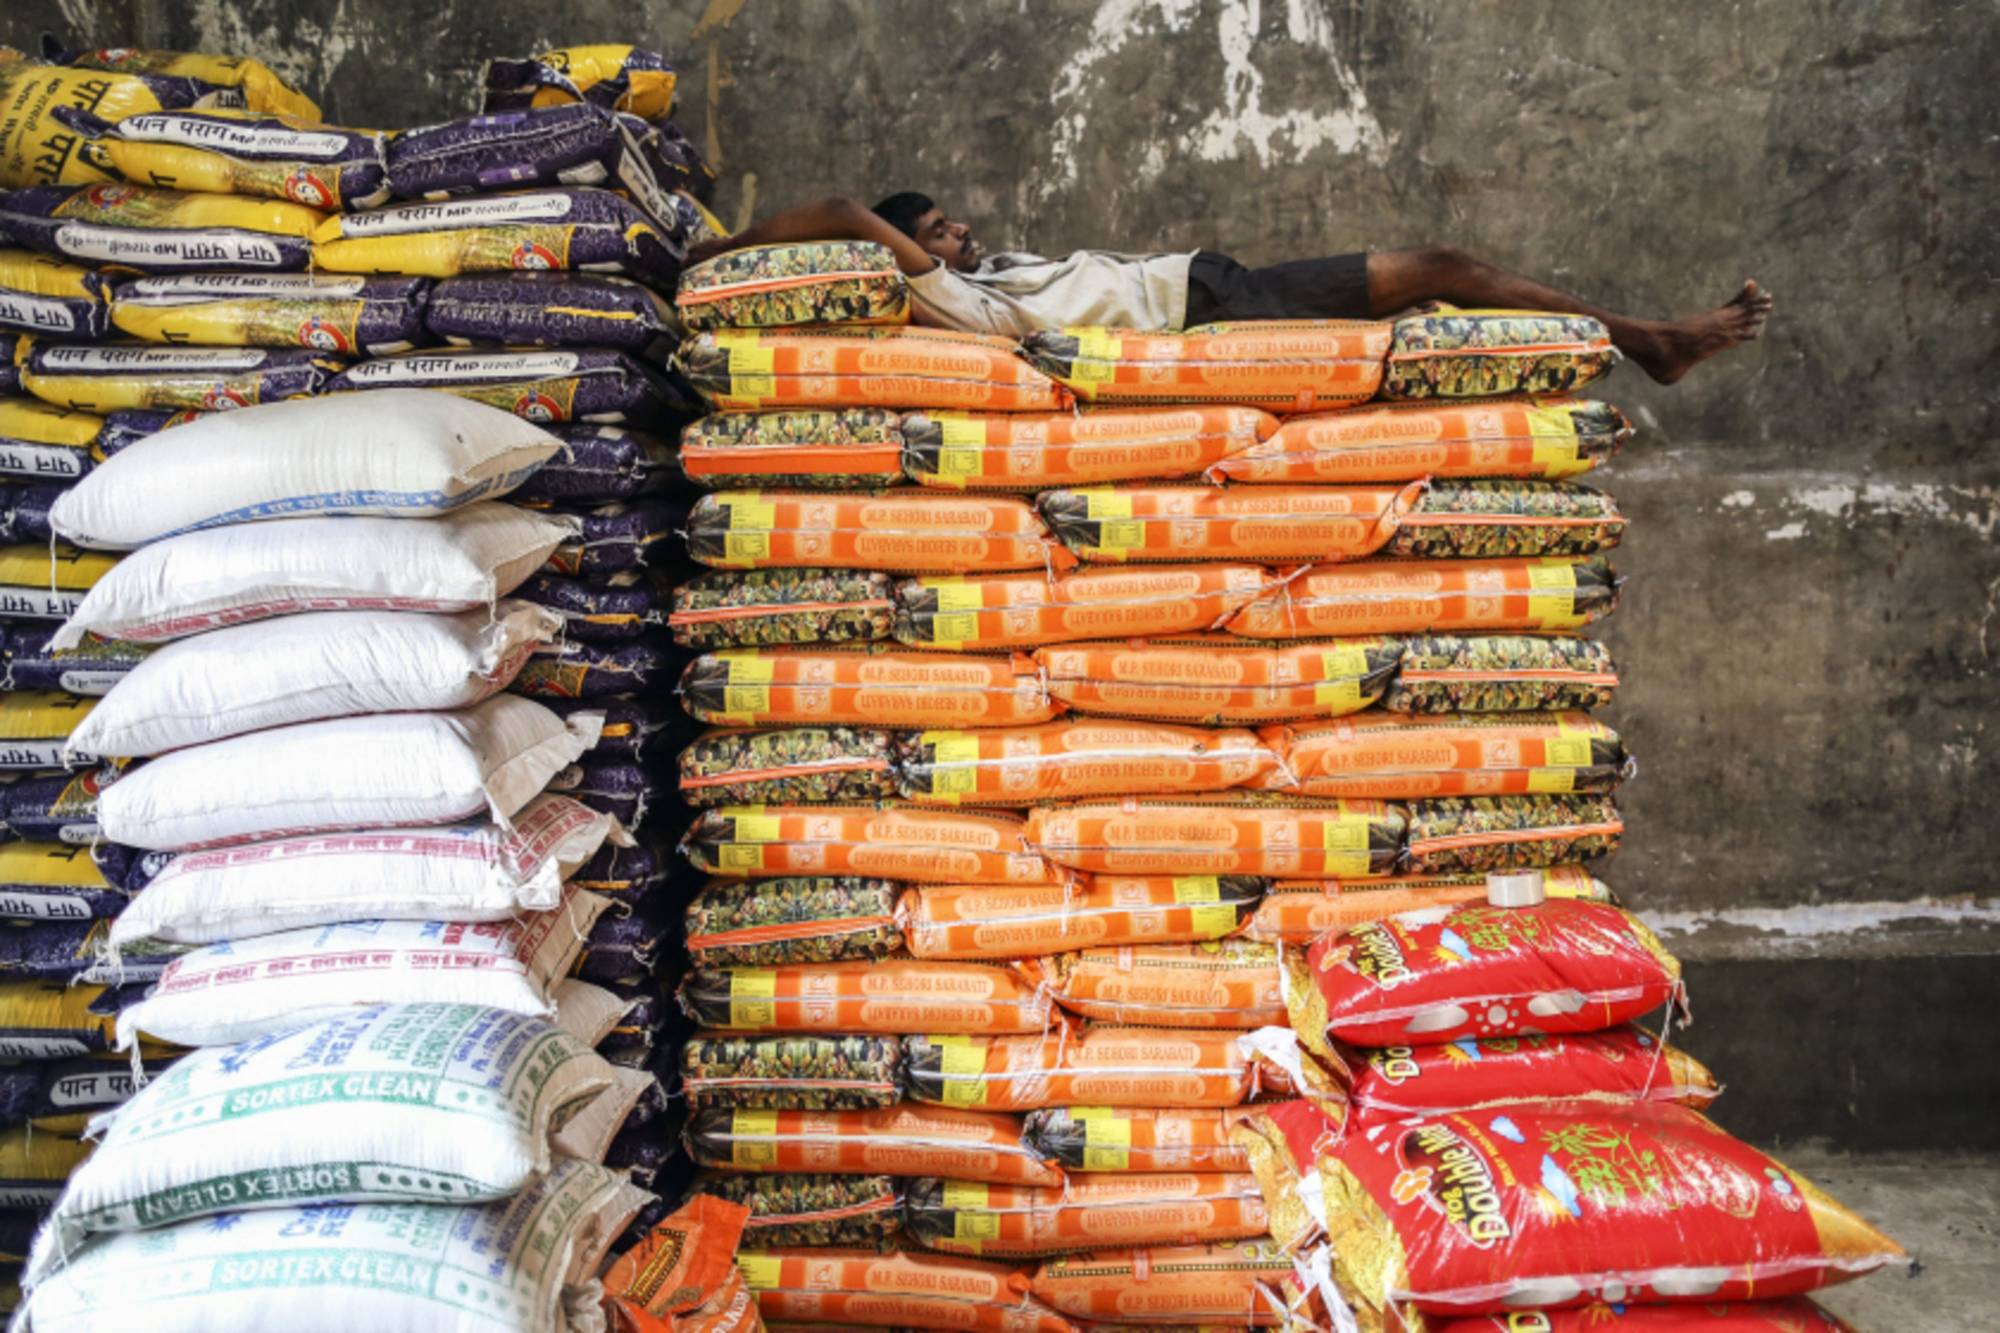 A worker sleeps on bags of wheat during a break at a wholesale market in Mumbai, India, last month. | BLOOMBERG